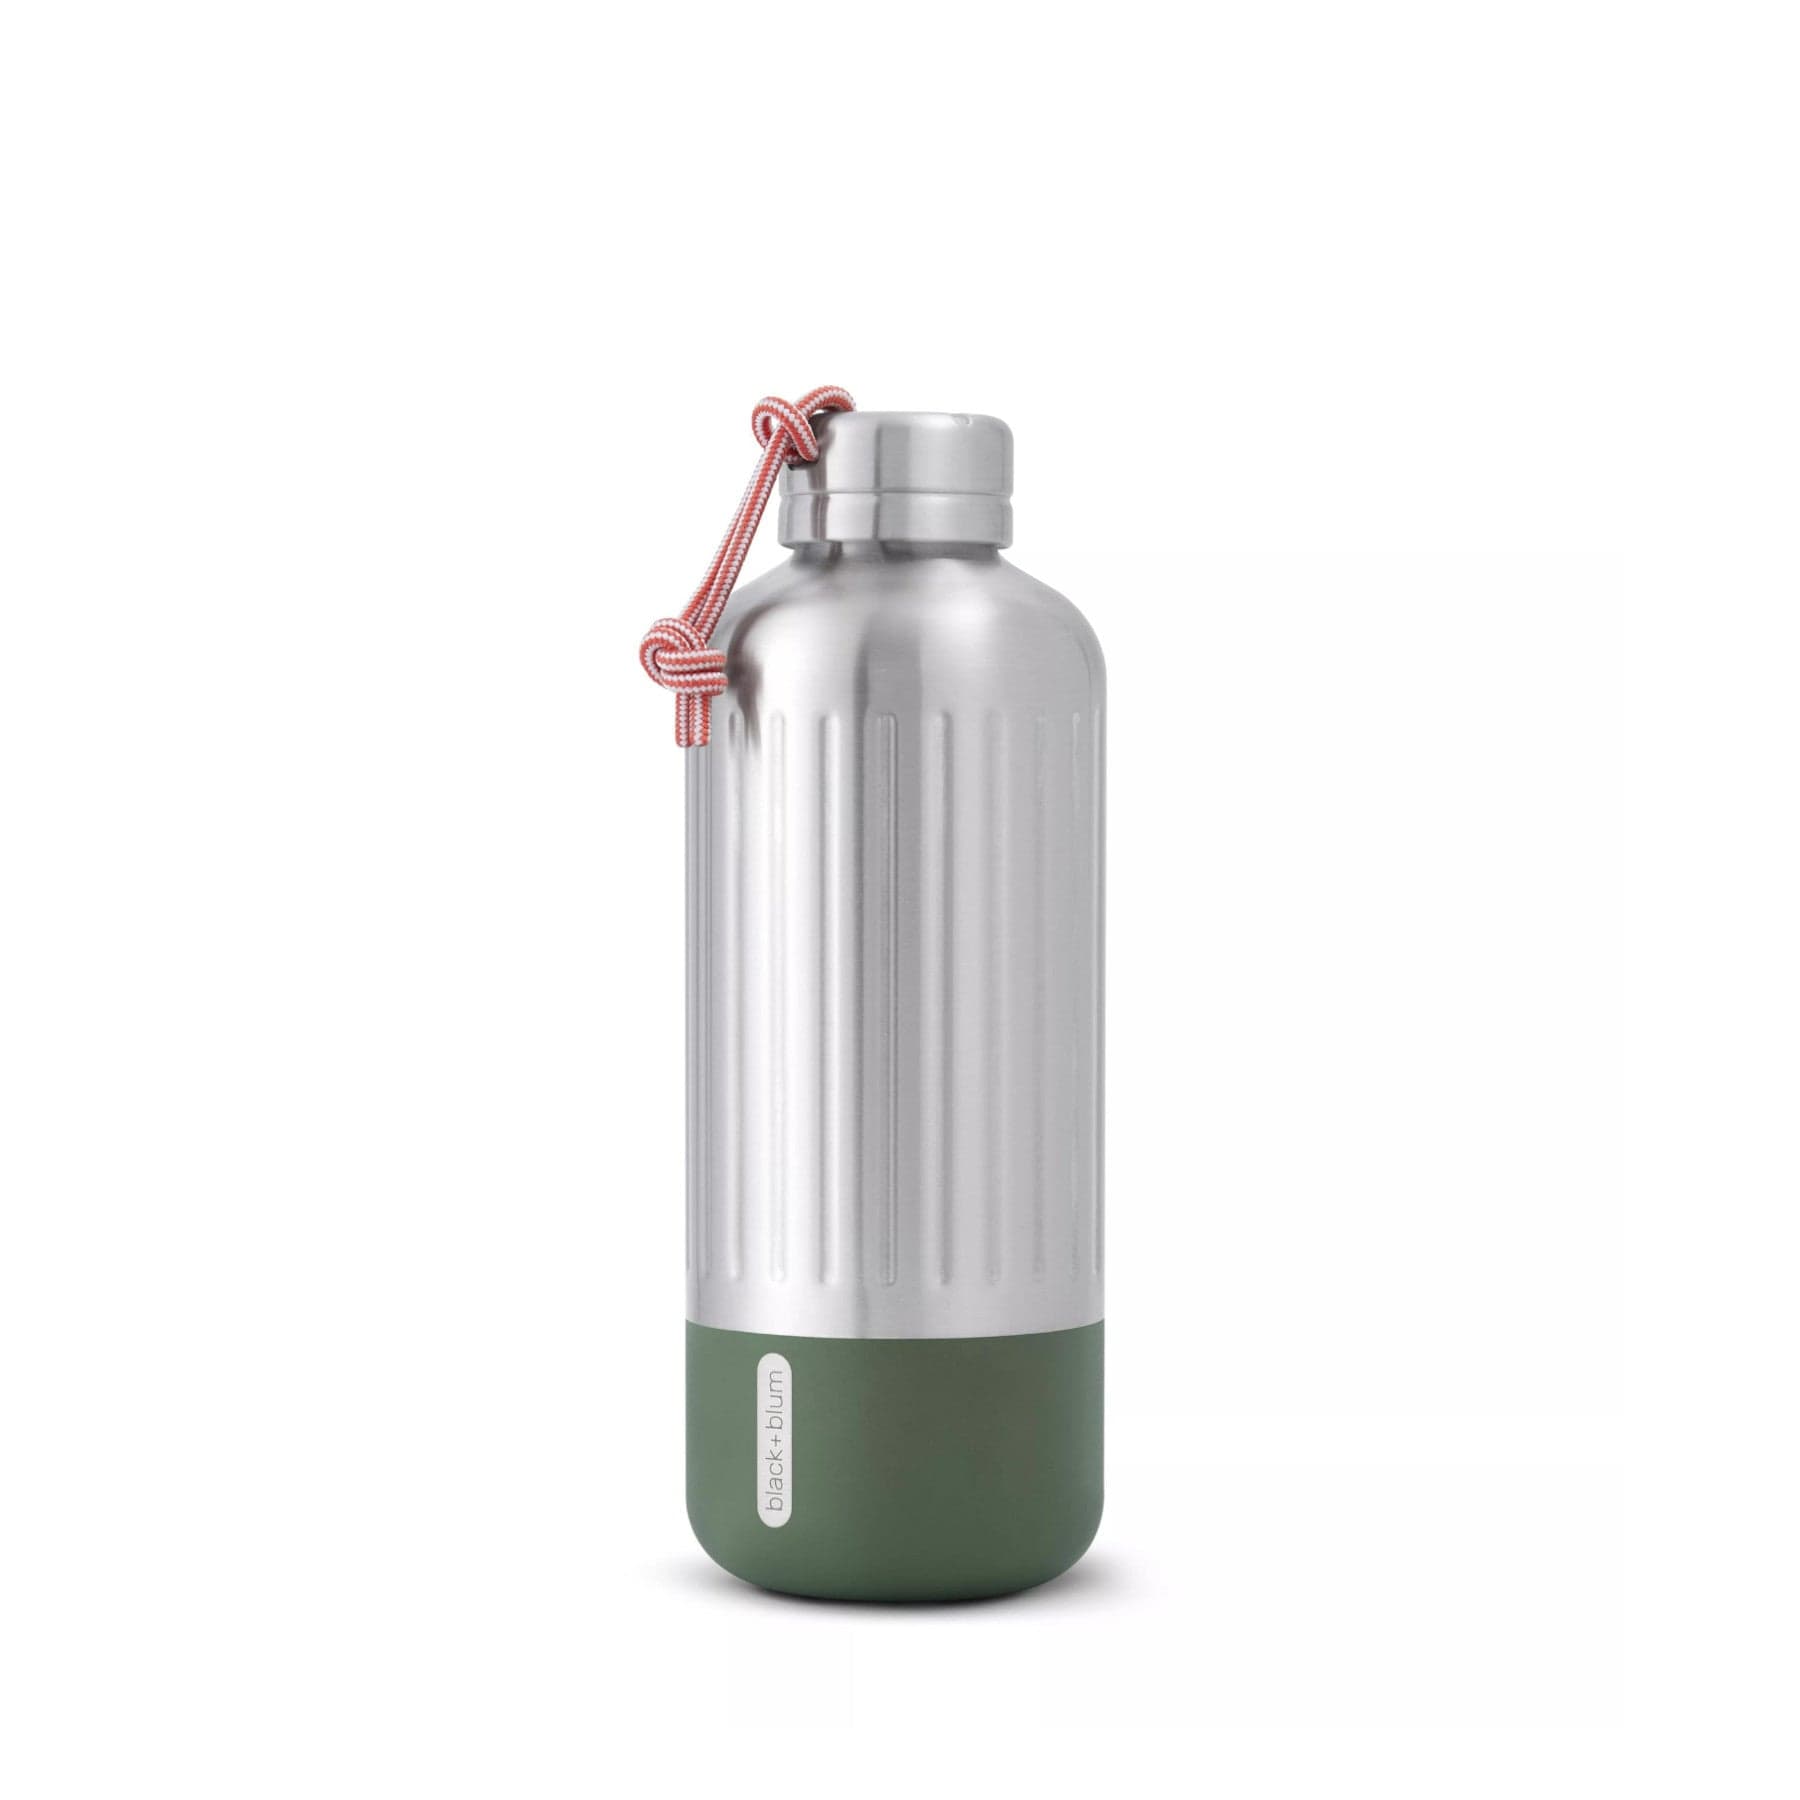 Stainless steel water bottle with strap on white background, reusable insulated container, eco-friendly hydration, outdoor adventure gear, metal drink flask.